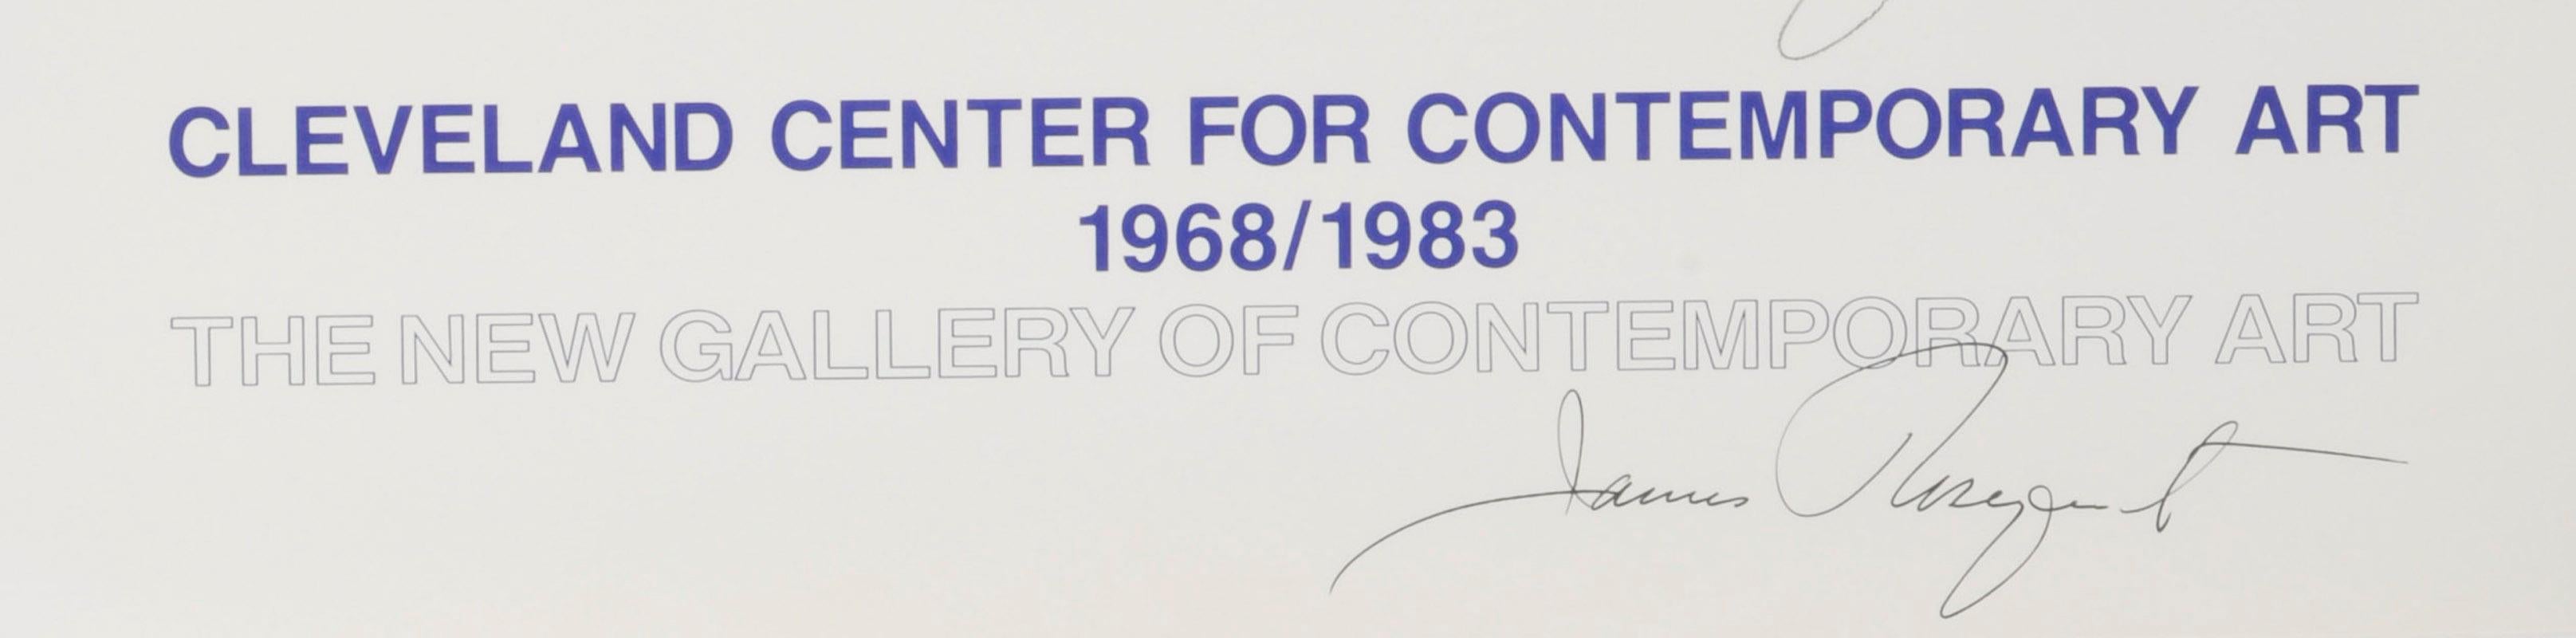 Cleveland Center for Contemporary Art 1968/ 1983 For Sale 1